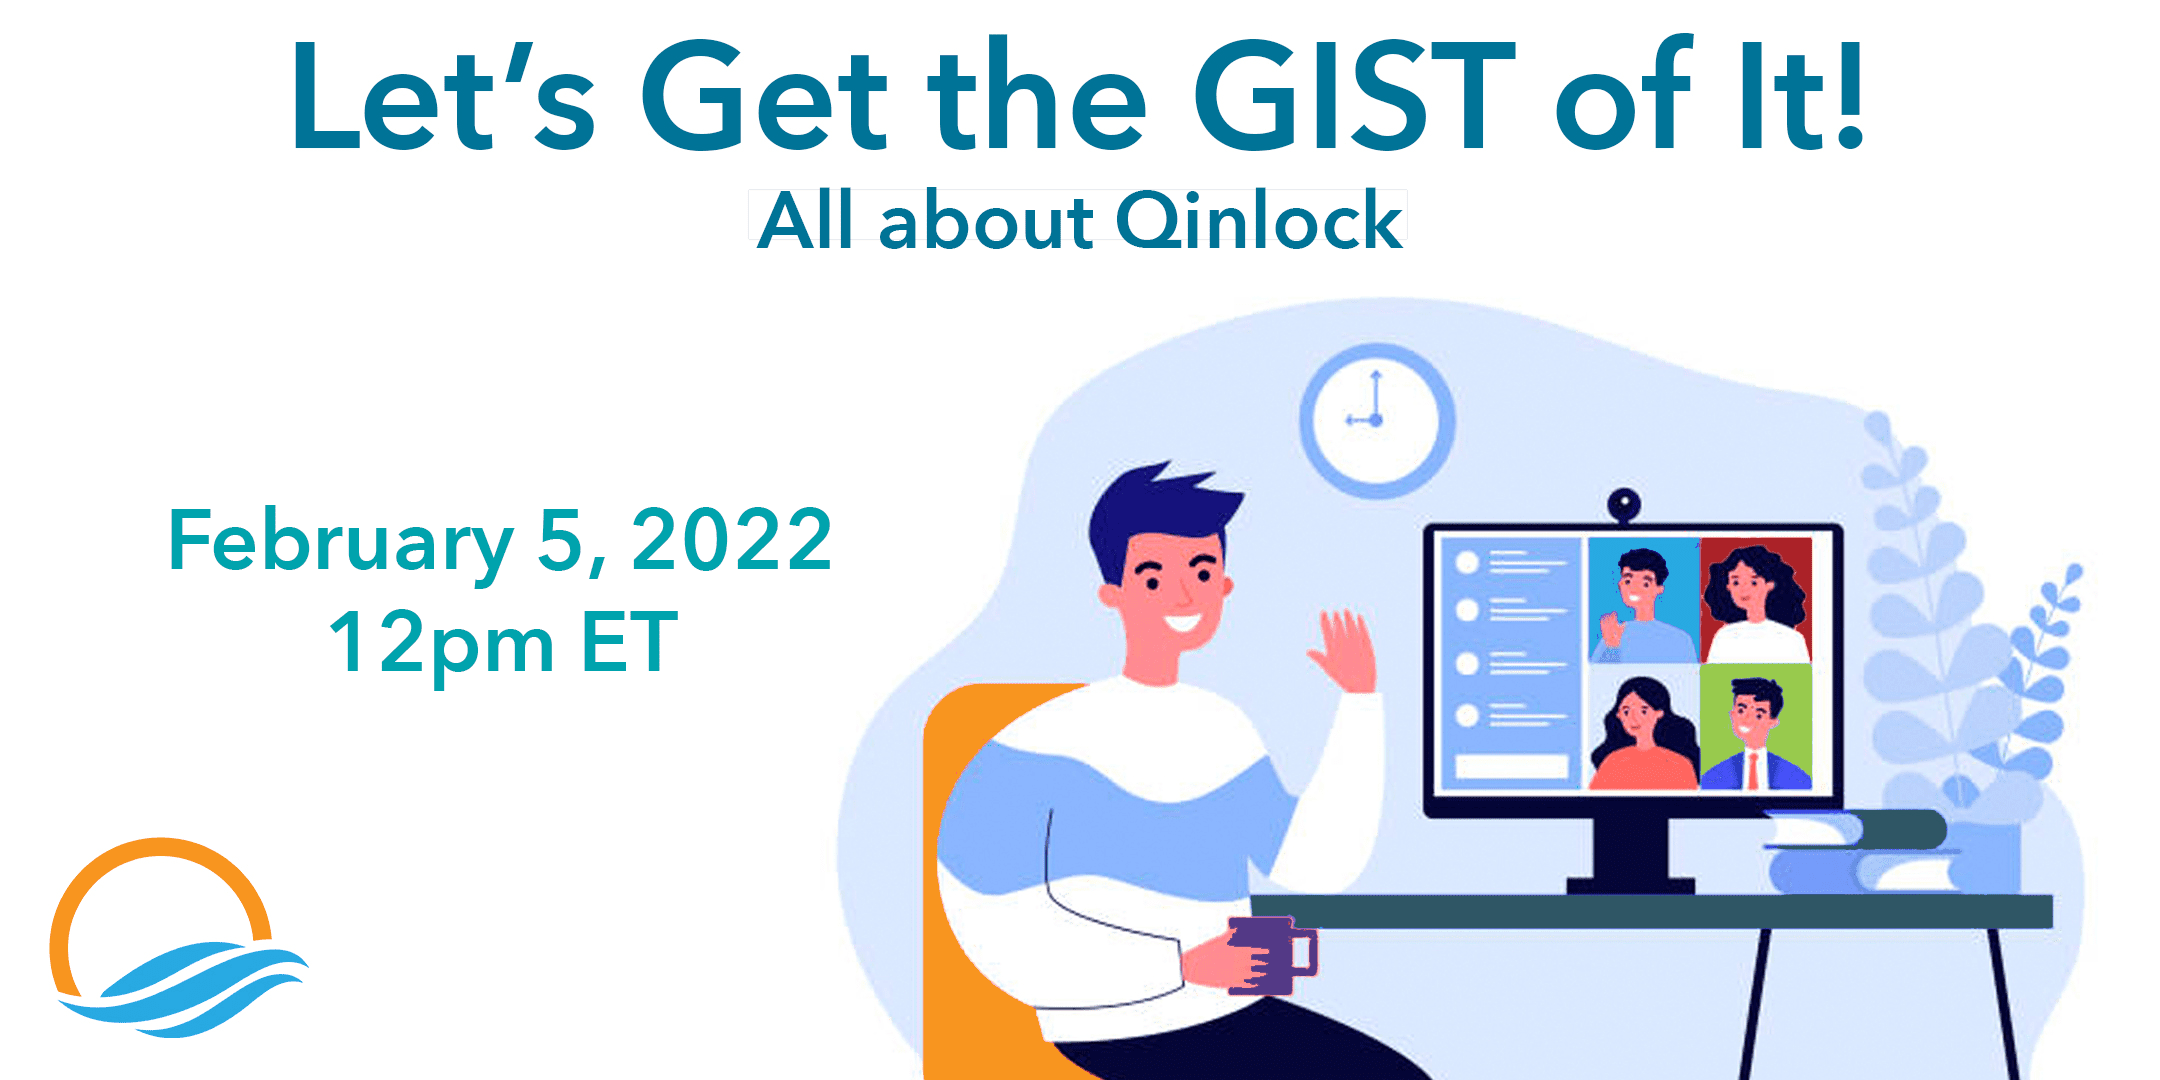 This 'Let’s Get the GIST of It' installment will focus on Qinlock (ripretinib). During this recurring online event, patients and caregivers can participate and share their overall experiences (good or bad) of their current treatment. The goal of this program is to discuss key topics that will provide patients and caregivers with insight about their current treatment. We will discuss topics like side effects, dosages, scans, and support. You will also have the opportunity to interact and connect with patients like you that are taking the same drug or experiencing the same side effects. Big or small, all input is important and we would love for you to be part of this program. If you or a loved one is currently taking Qinlock or is looking to learn more about it, please register for this event. Date: Feb. 5th Time: 12pm ET